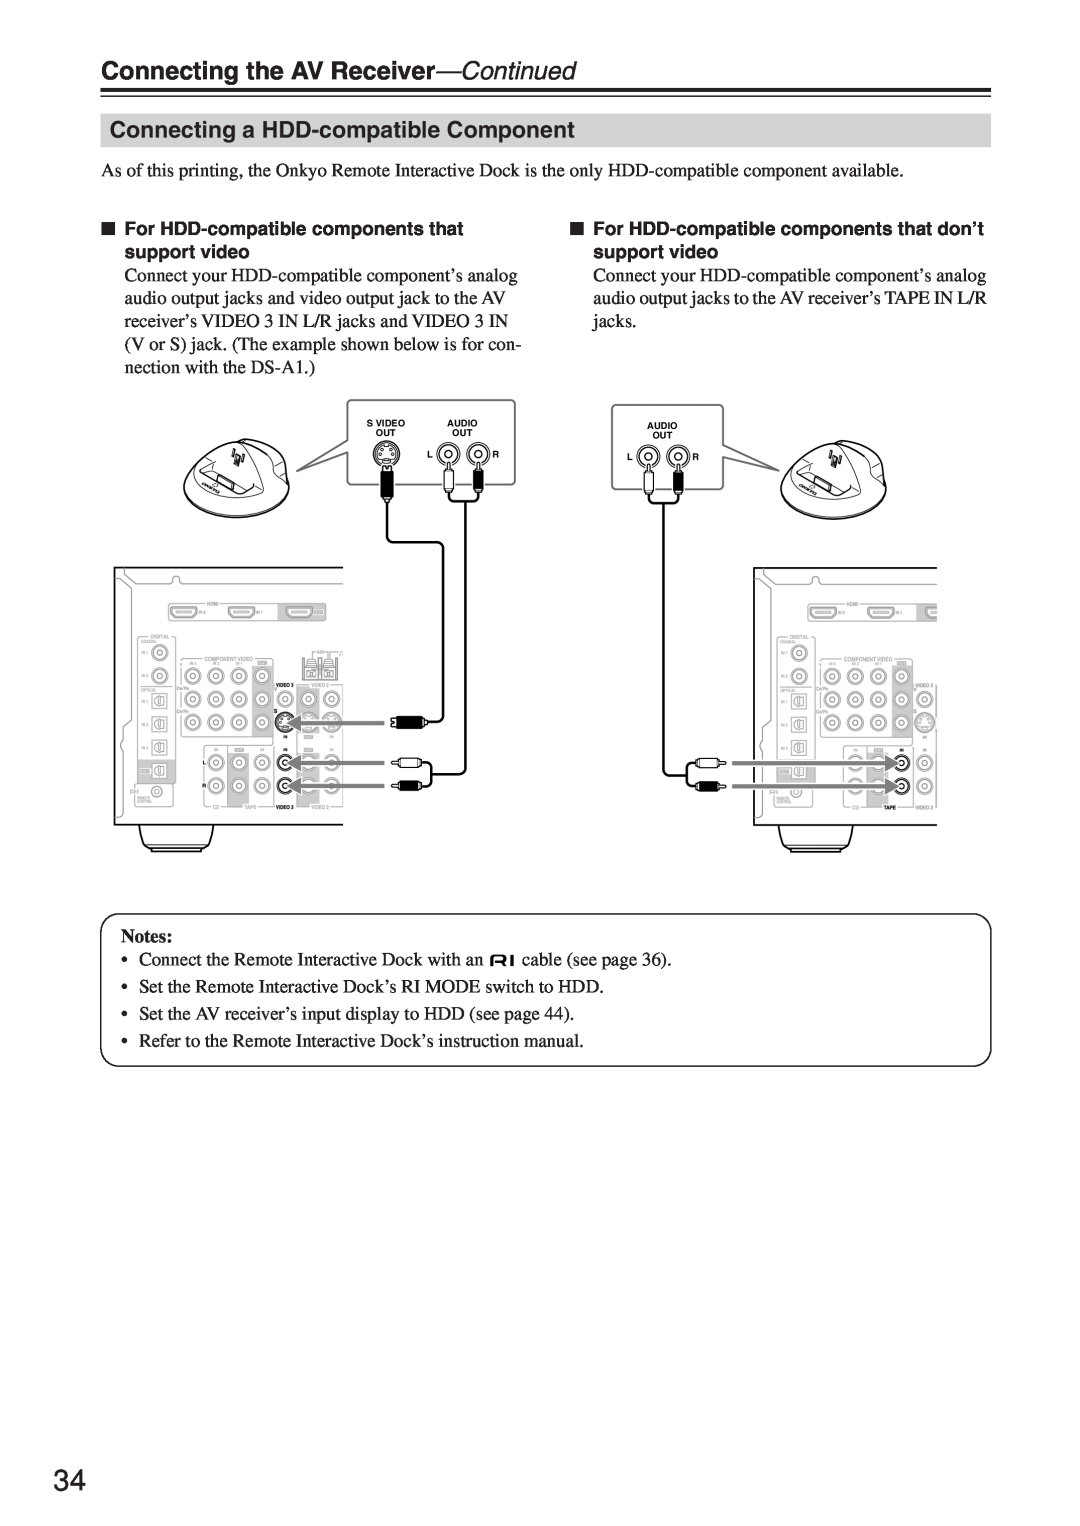 Onkyo HT-R640 instruction manual Connecting a HDD-compatible Component, Connecting the AV Receiver-Continued 